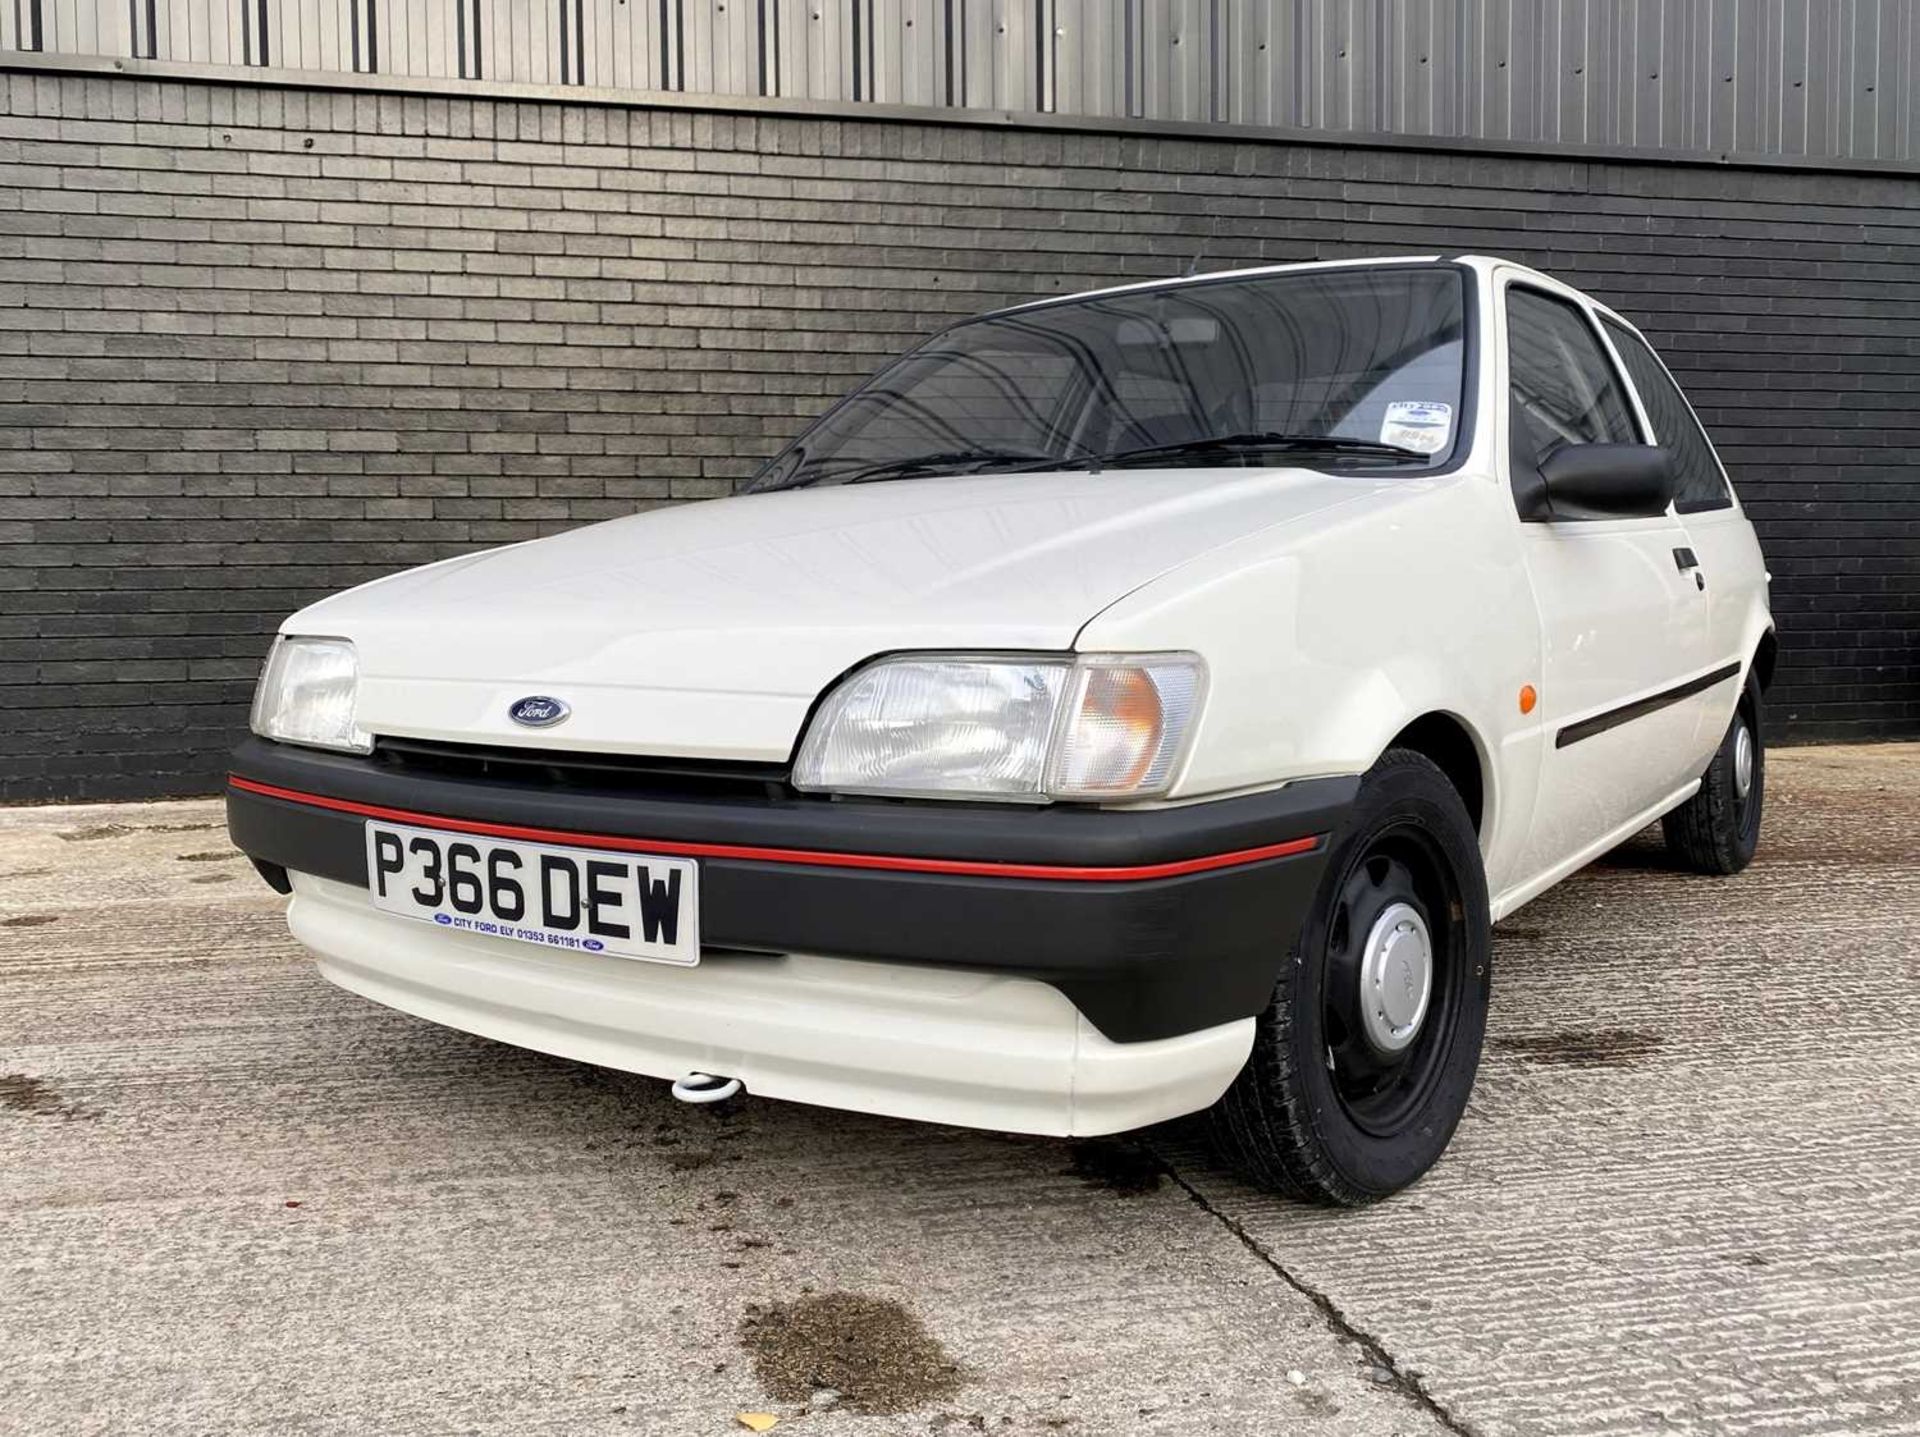 1996 Ford Fiesta Classic Only 18,000 miles - Image 2 of 65